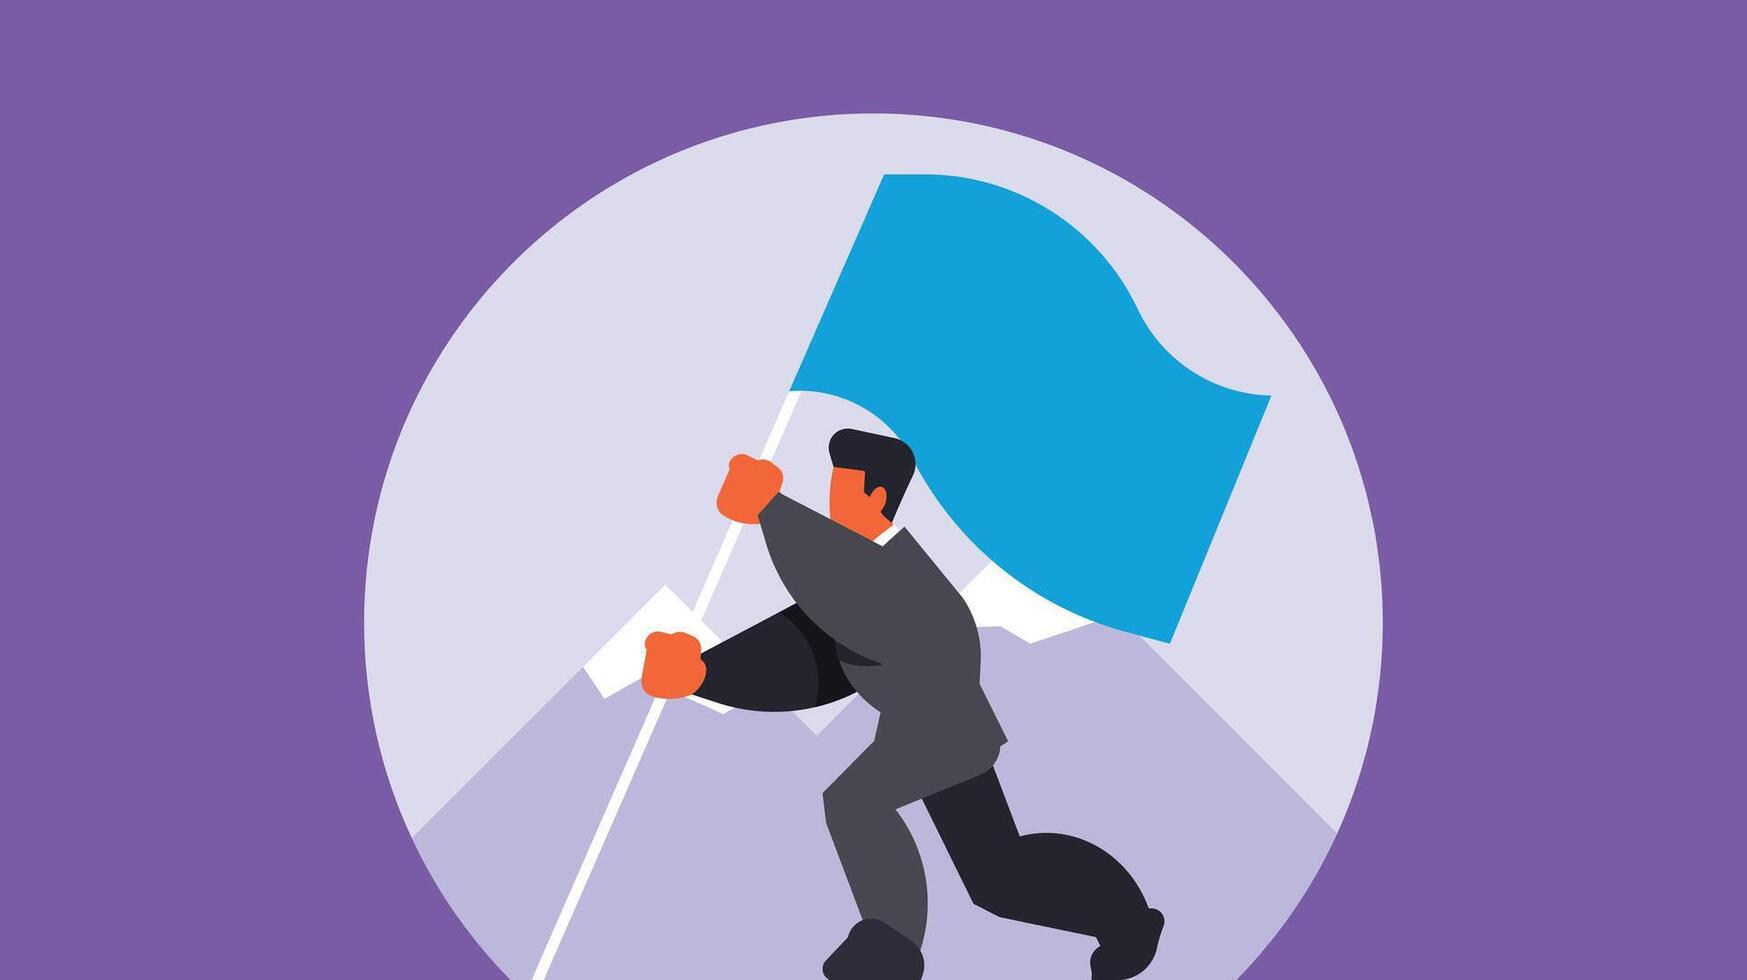 business man lift a flag on mountain top vector illustration